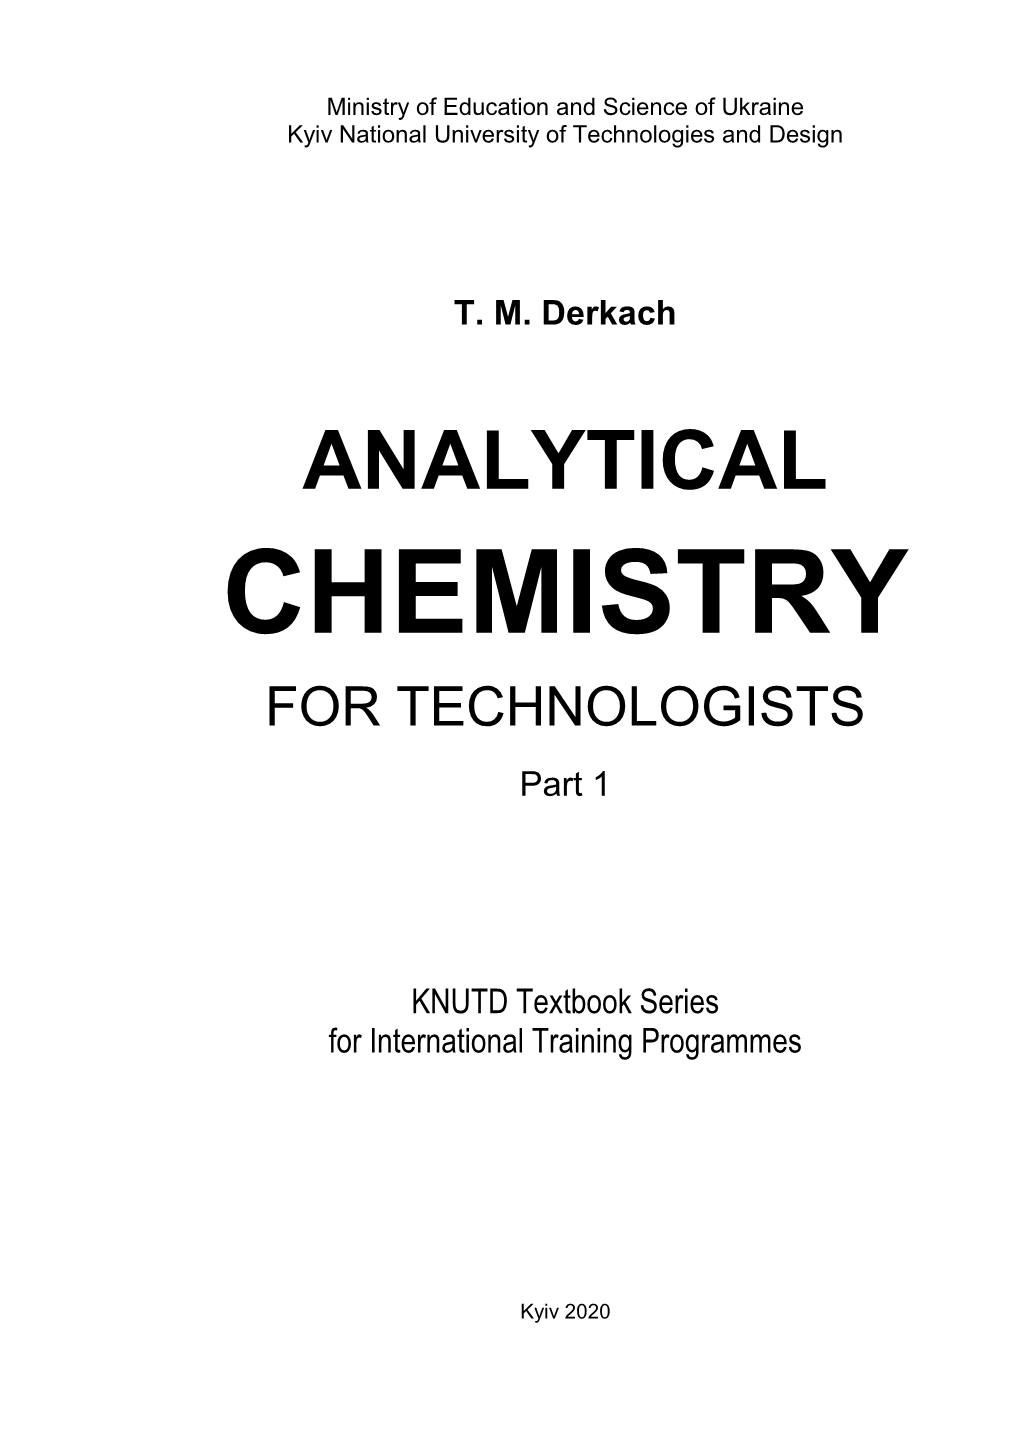 ANALYTICAL CHEMISTRY for TECHNOLOGISTS Part 1